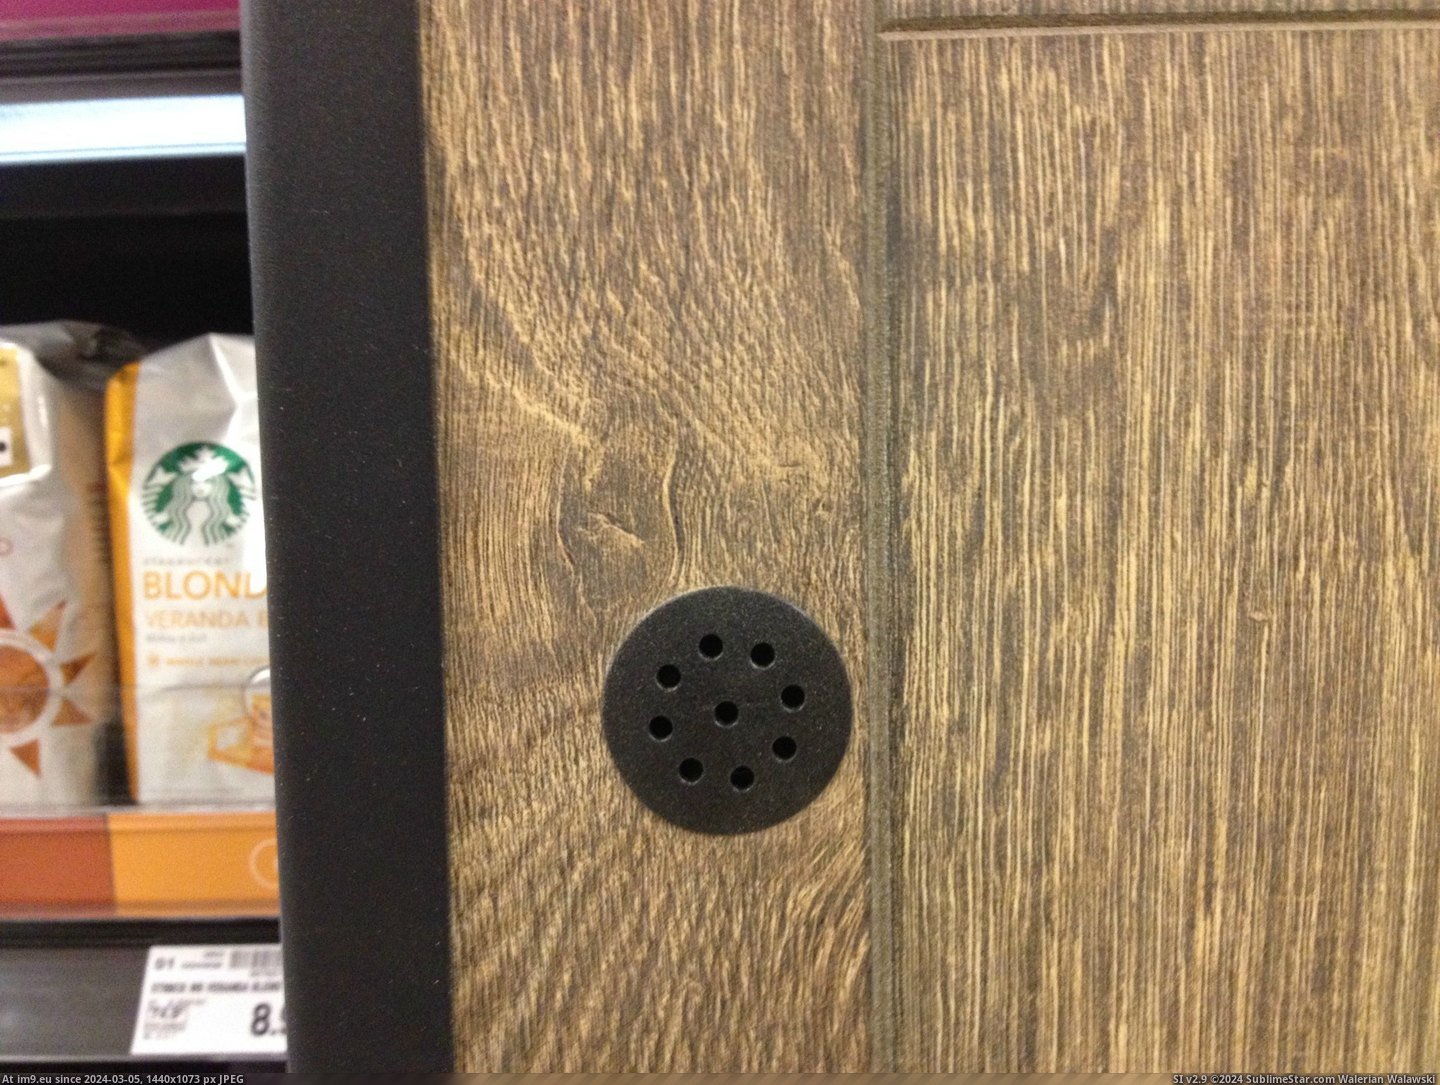 #Work #New #Secret #Smell #Delivery #Starbucks #Coffee #System #Display [Mildlyinteresting] The new Starbucks display at my work has a secret coffee smell delivery system. 4 Pic. (Image of album My r/MILDLYINTERESTING favs))